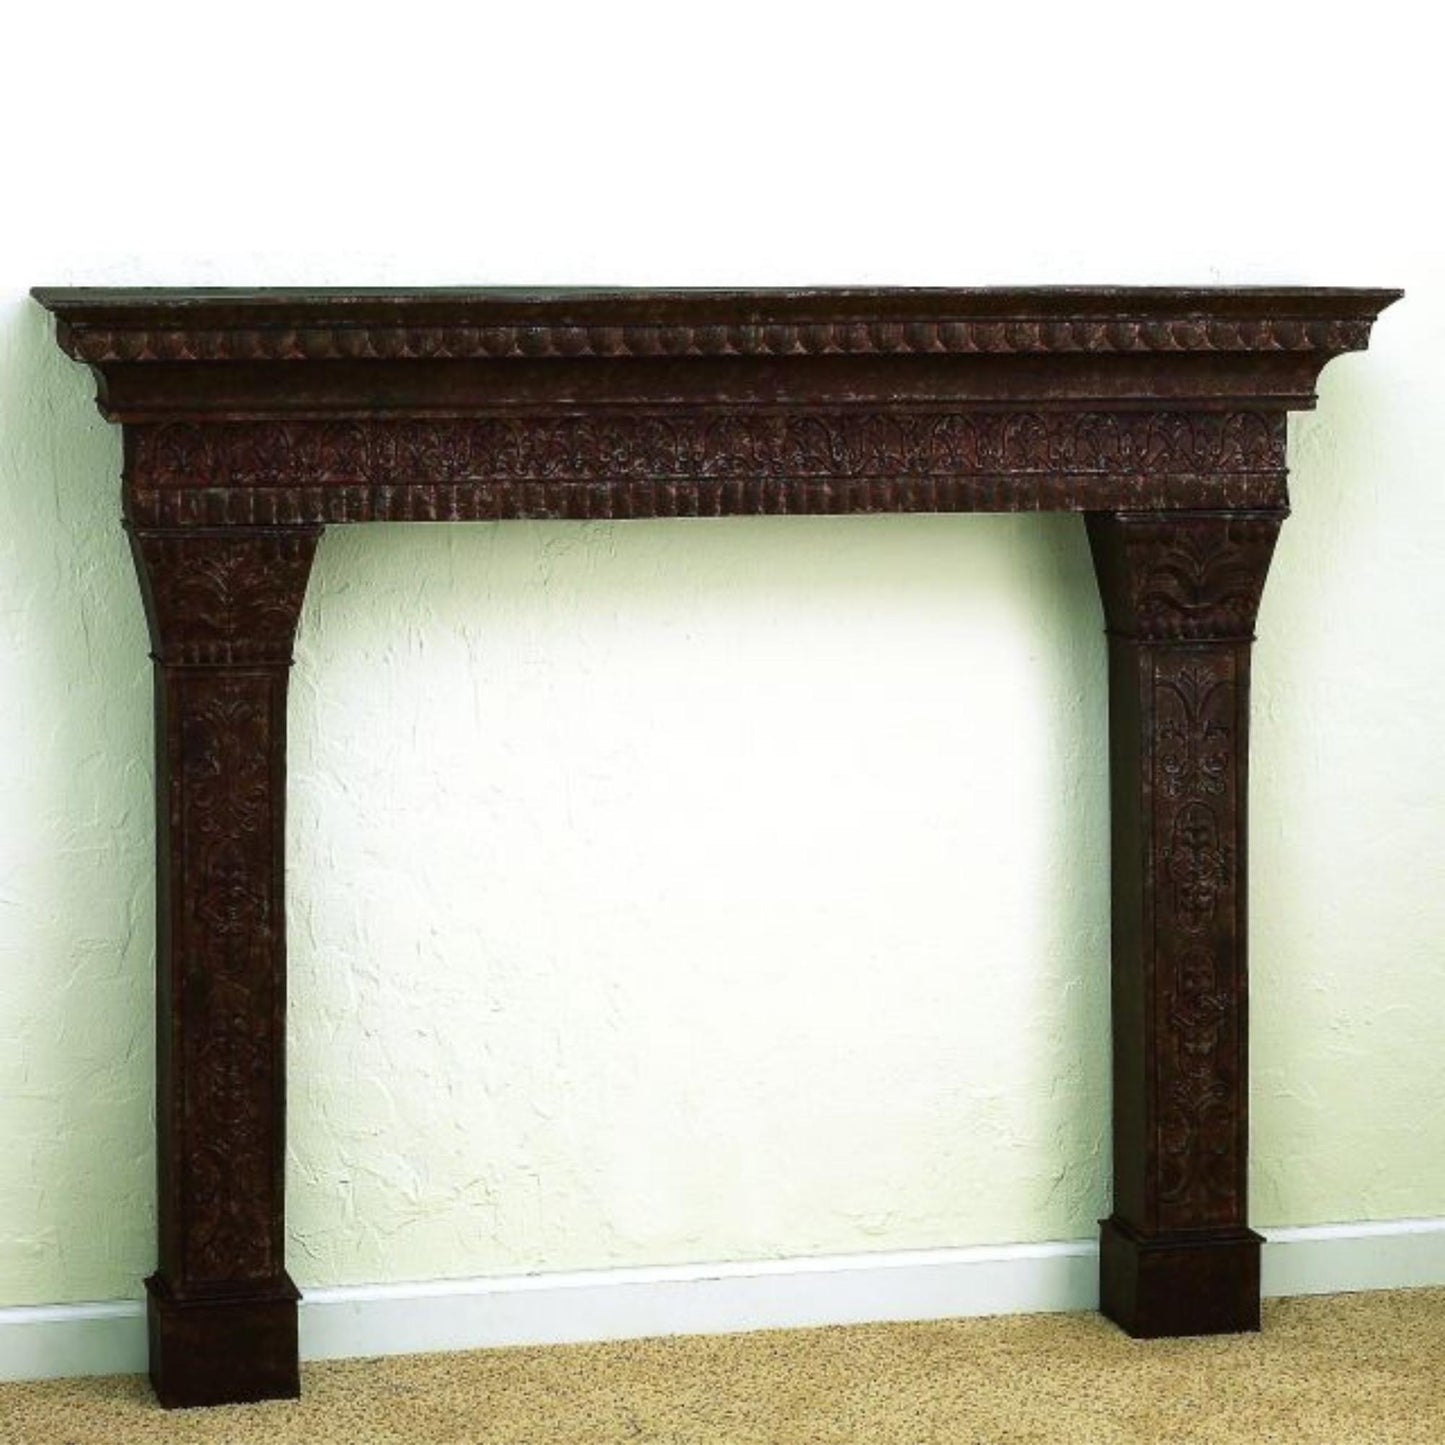 Iron Fireplace Mantle - Brown Taupe 3 Section Mantle shown against wall | InsideOutCatalog.com